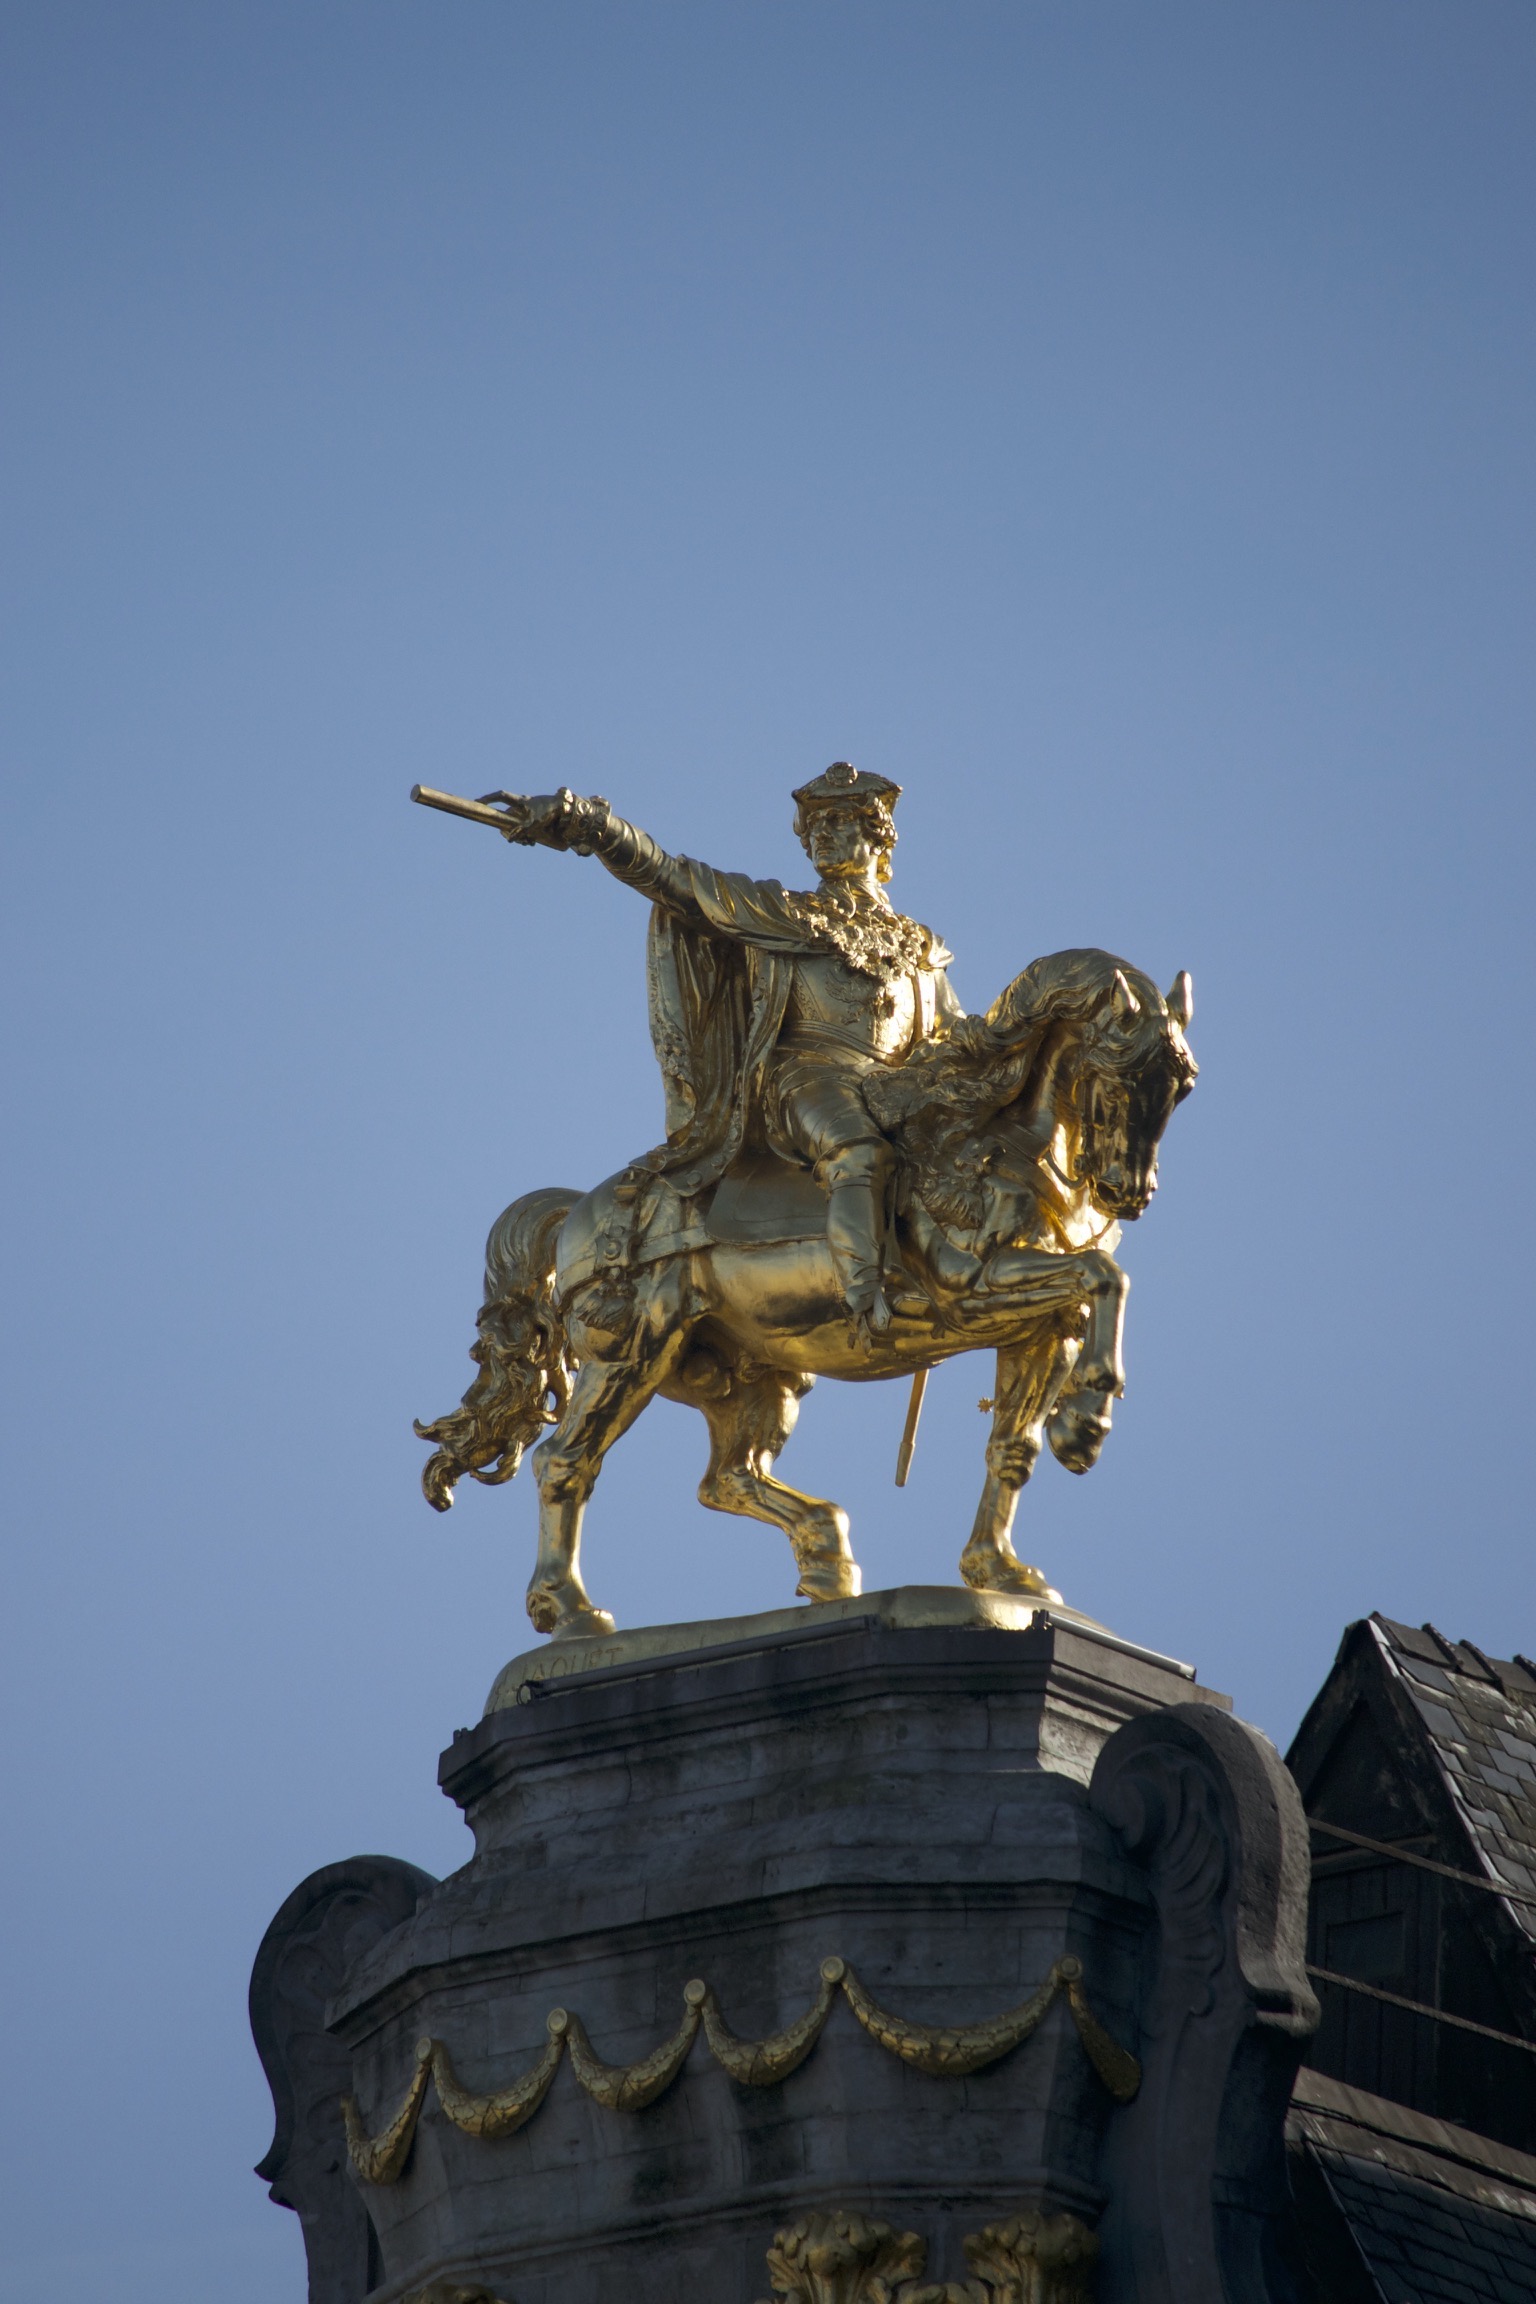 A golden statue of a man on a horse.